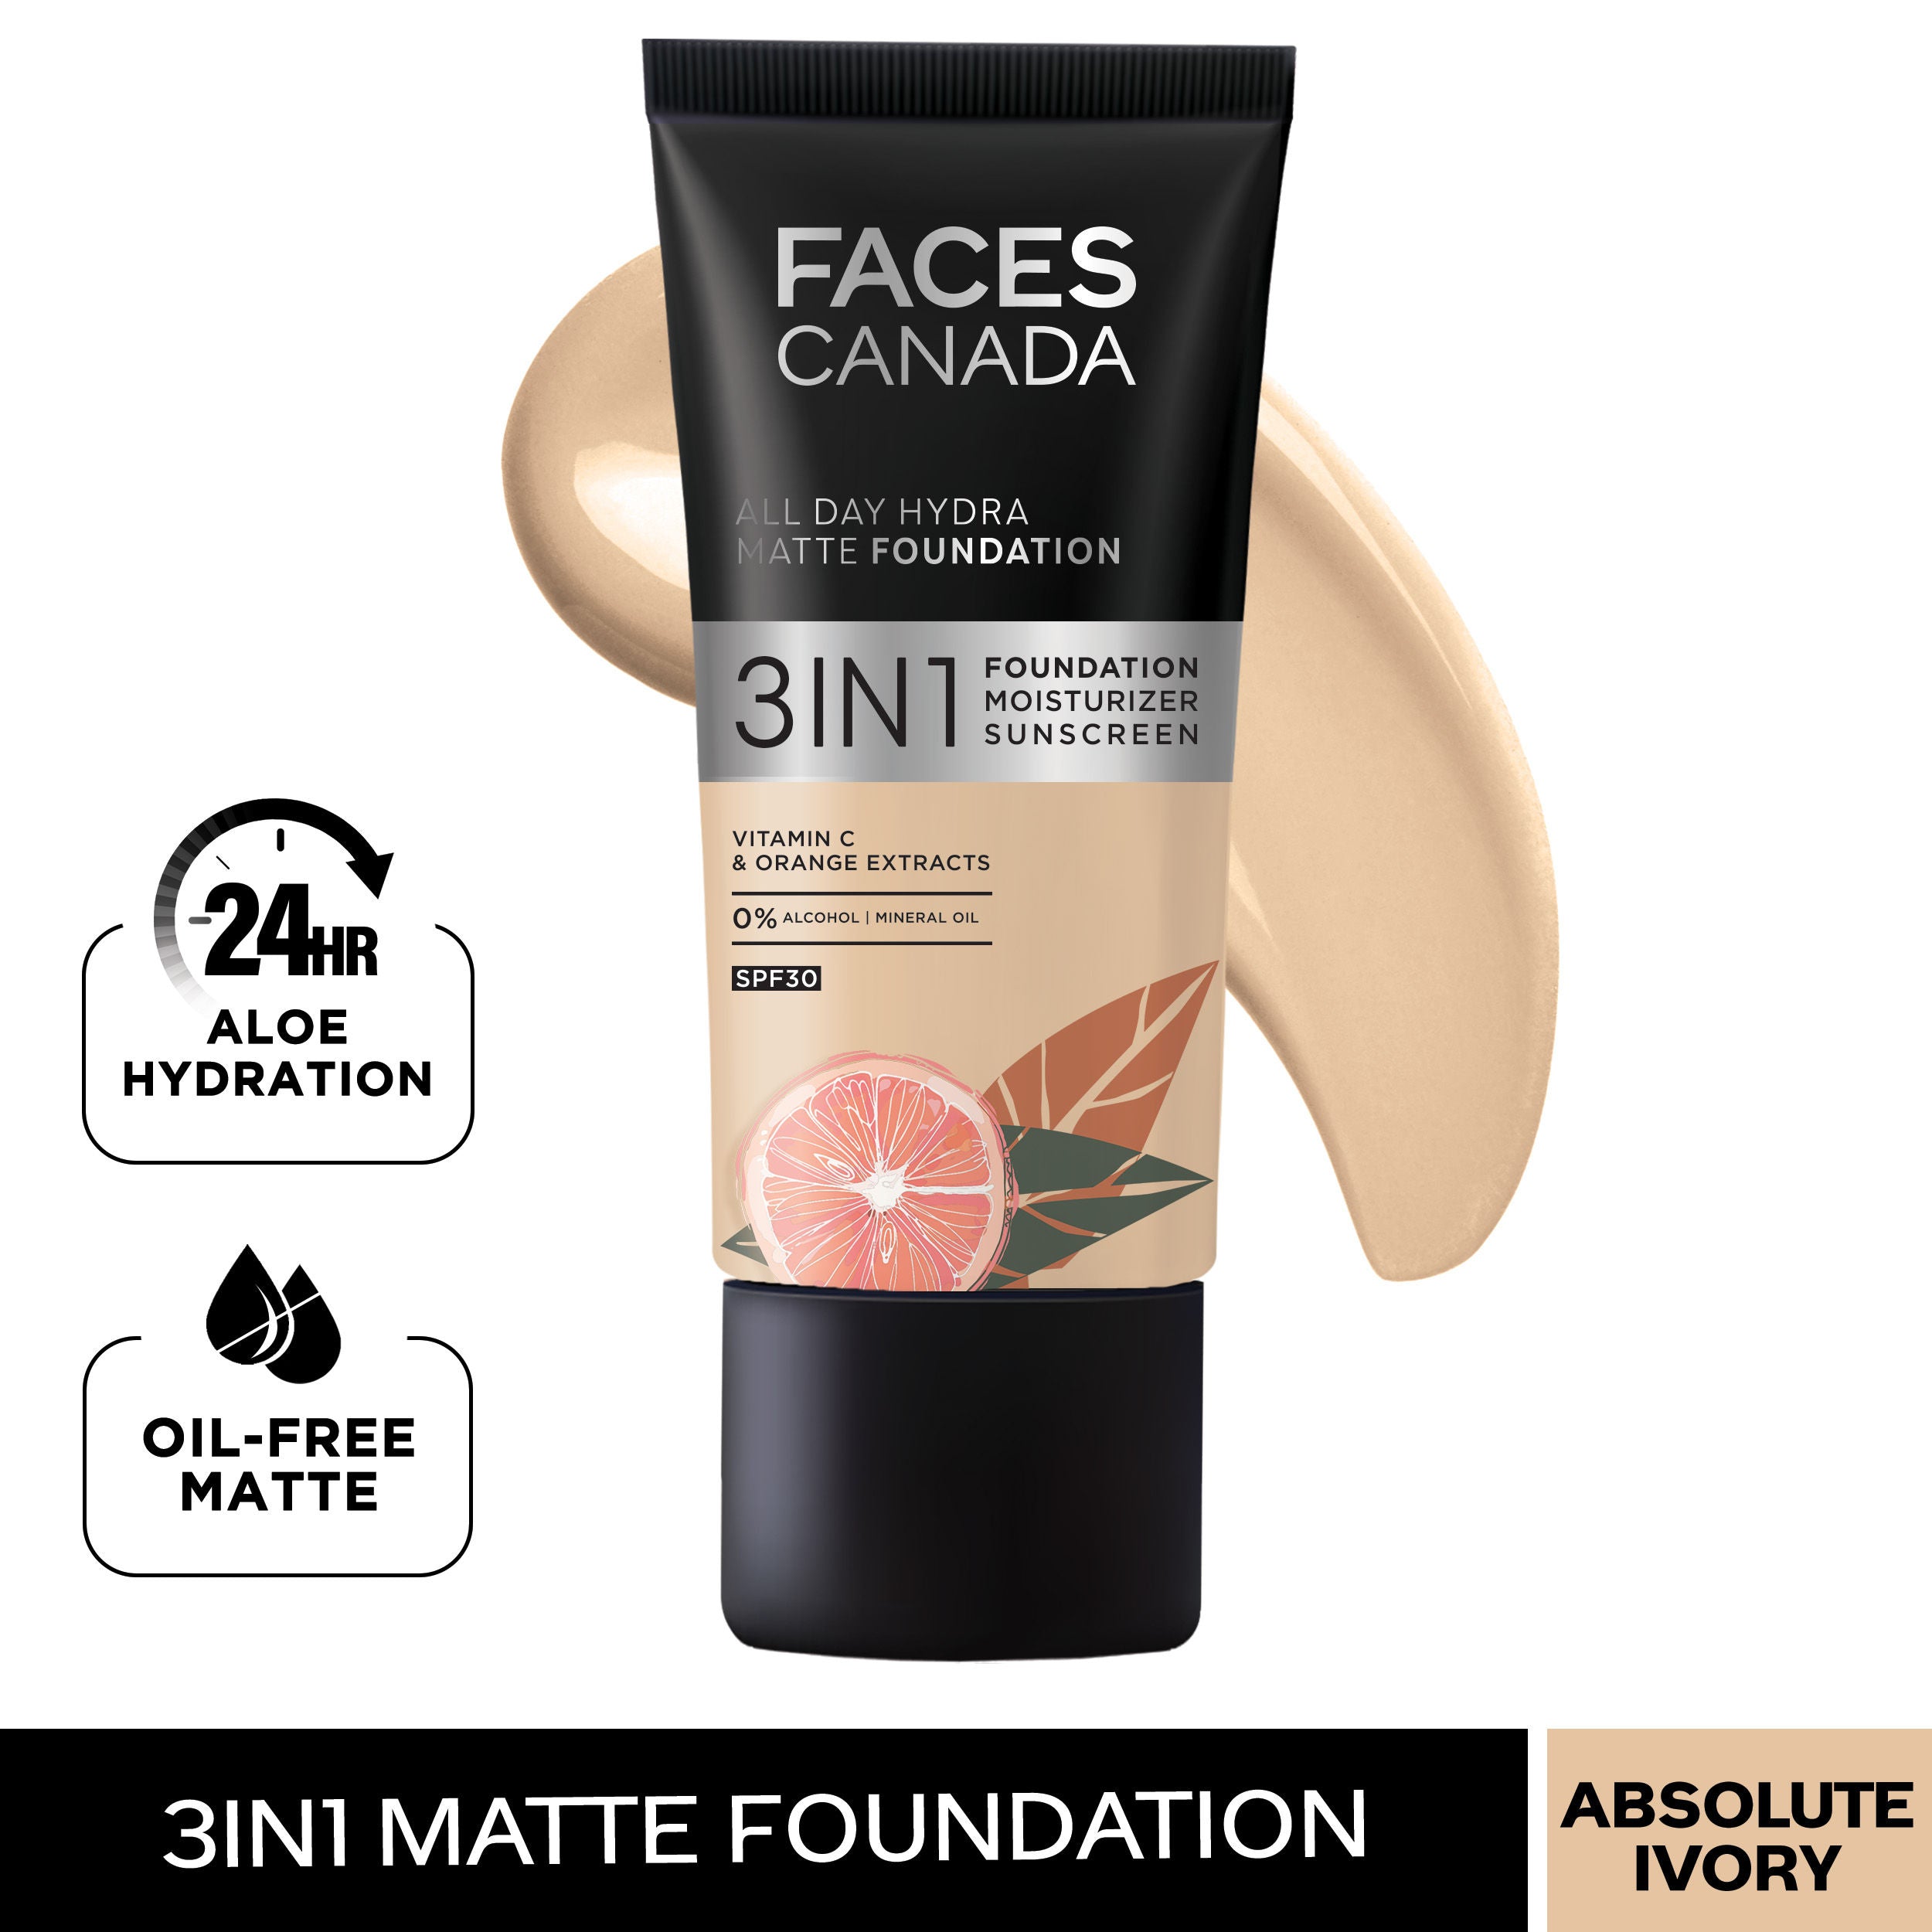 Faces Canada 3 In 1 All Day Hydra Matte Foundation - Absolute Ivory 012 (25ml) Faces Canada